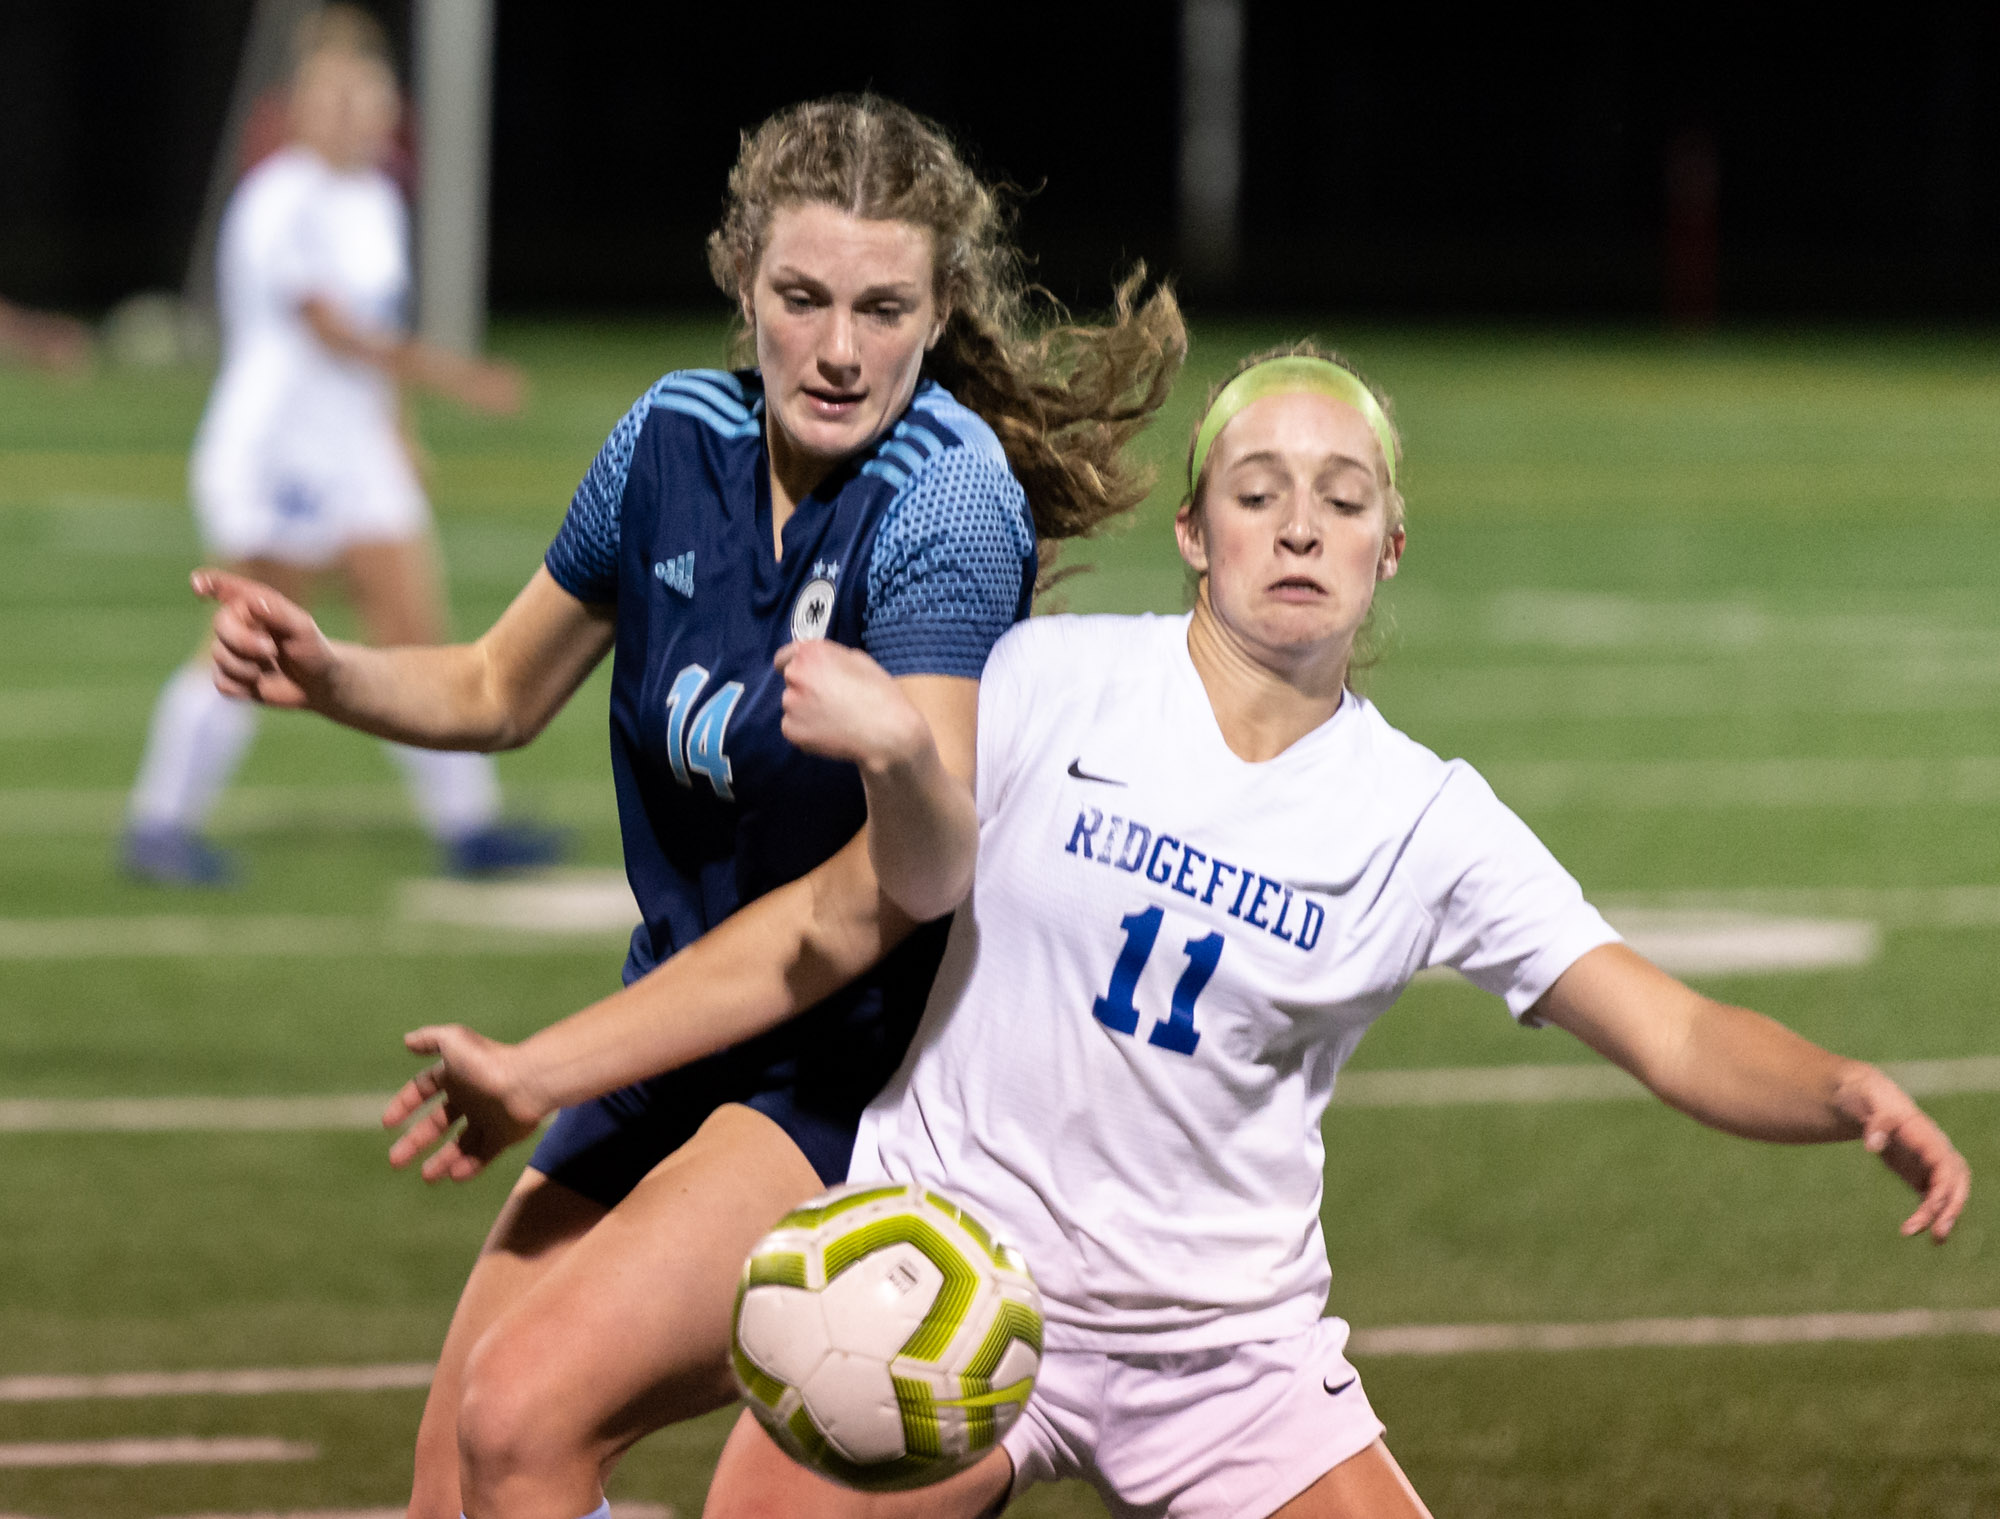 Hockinson's Molly Ramanchock and Ridgefield's Claire Jones fight for the ball in the 2A District Girls Soccer Championship on Thursday, Nov. 4, 2021, at District Stadium in Battle Ground.